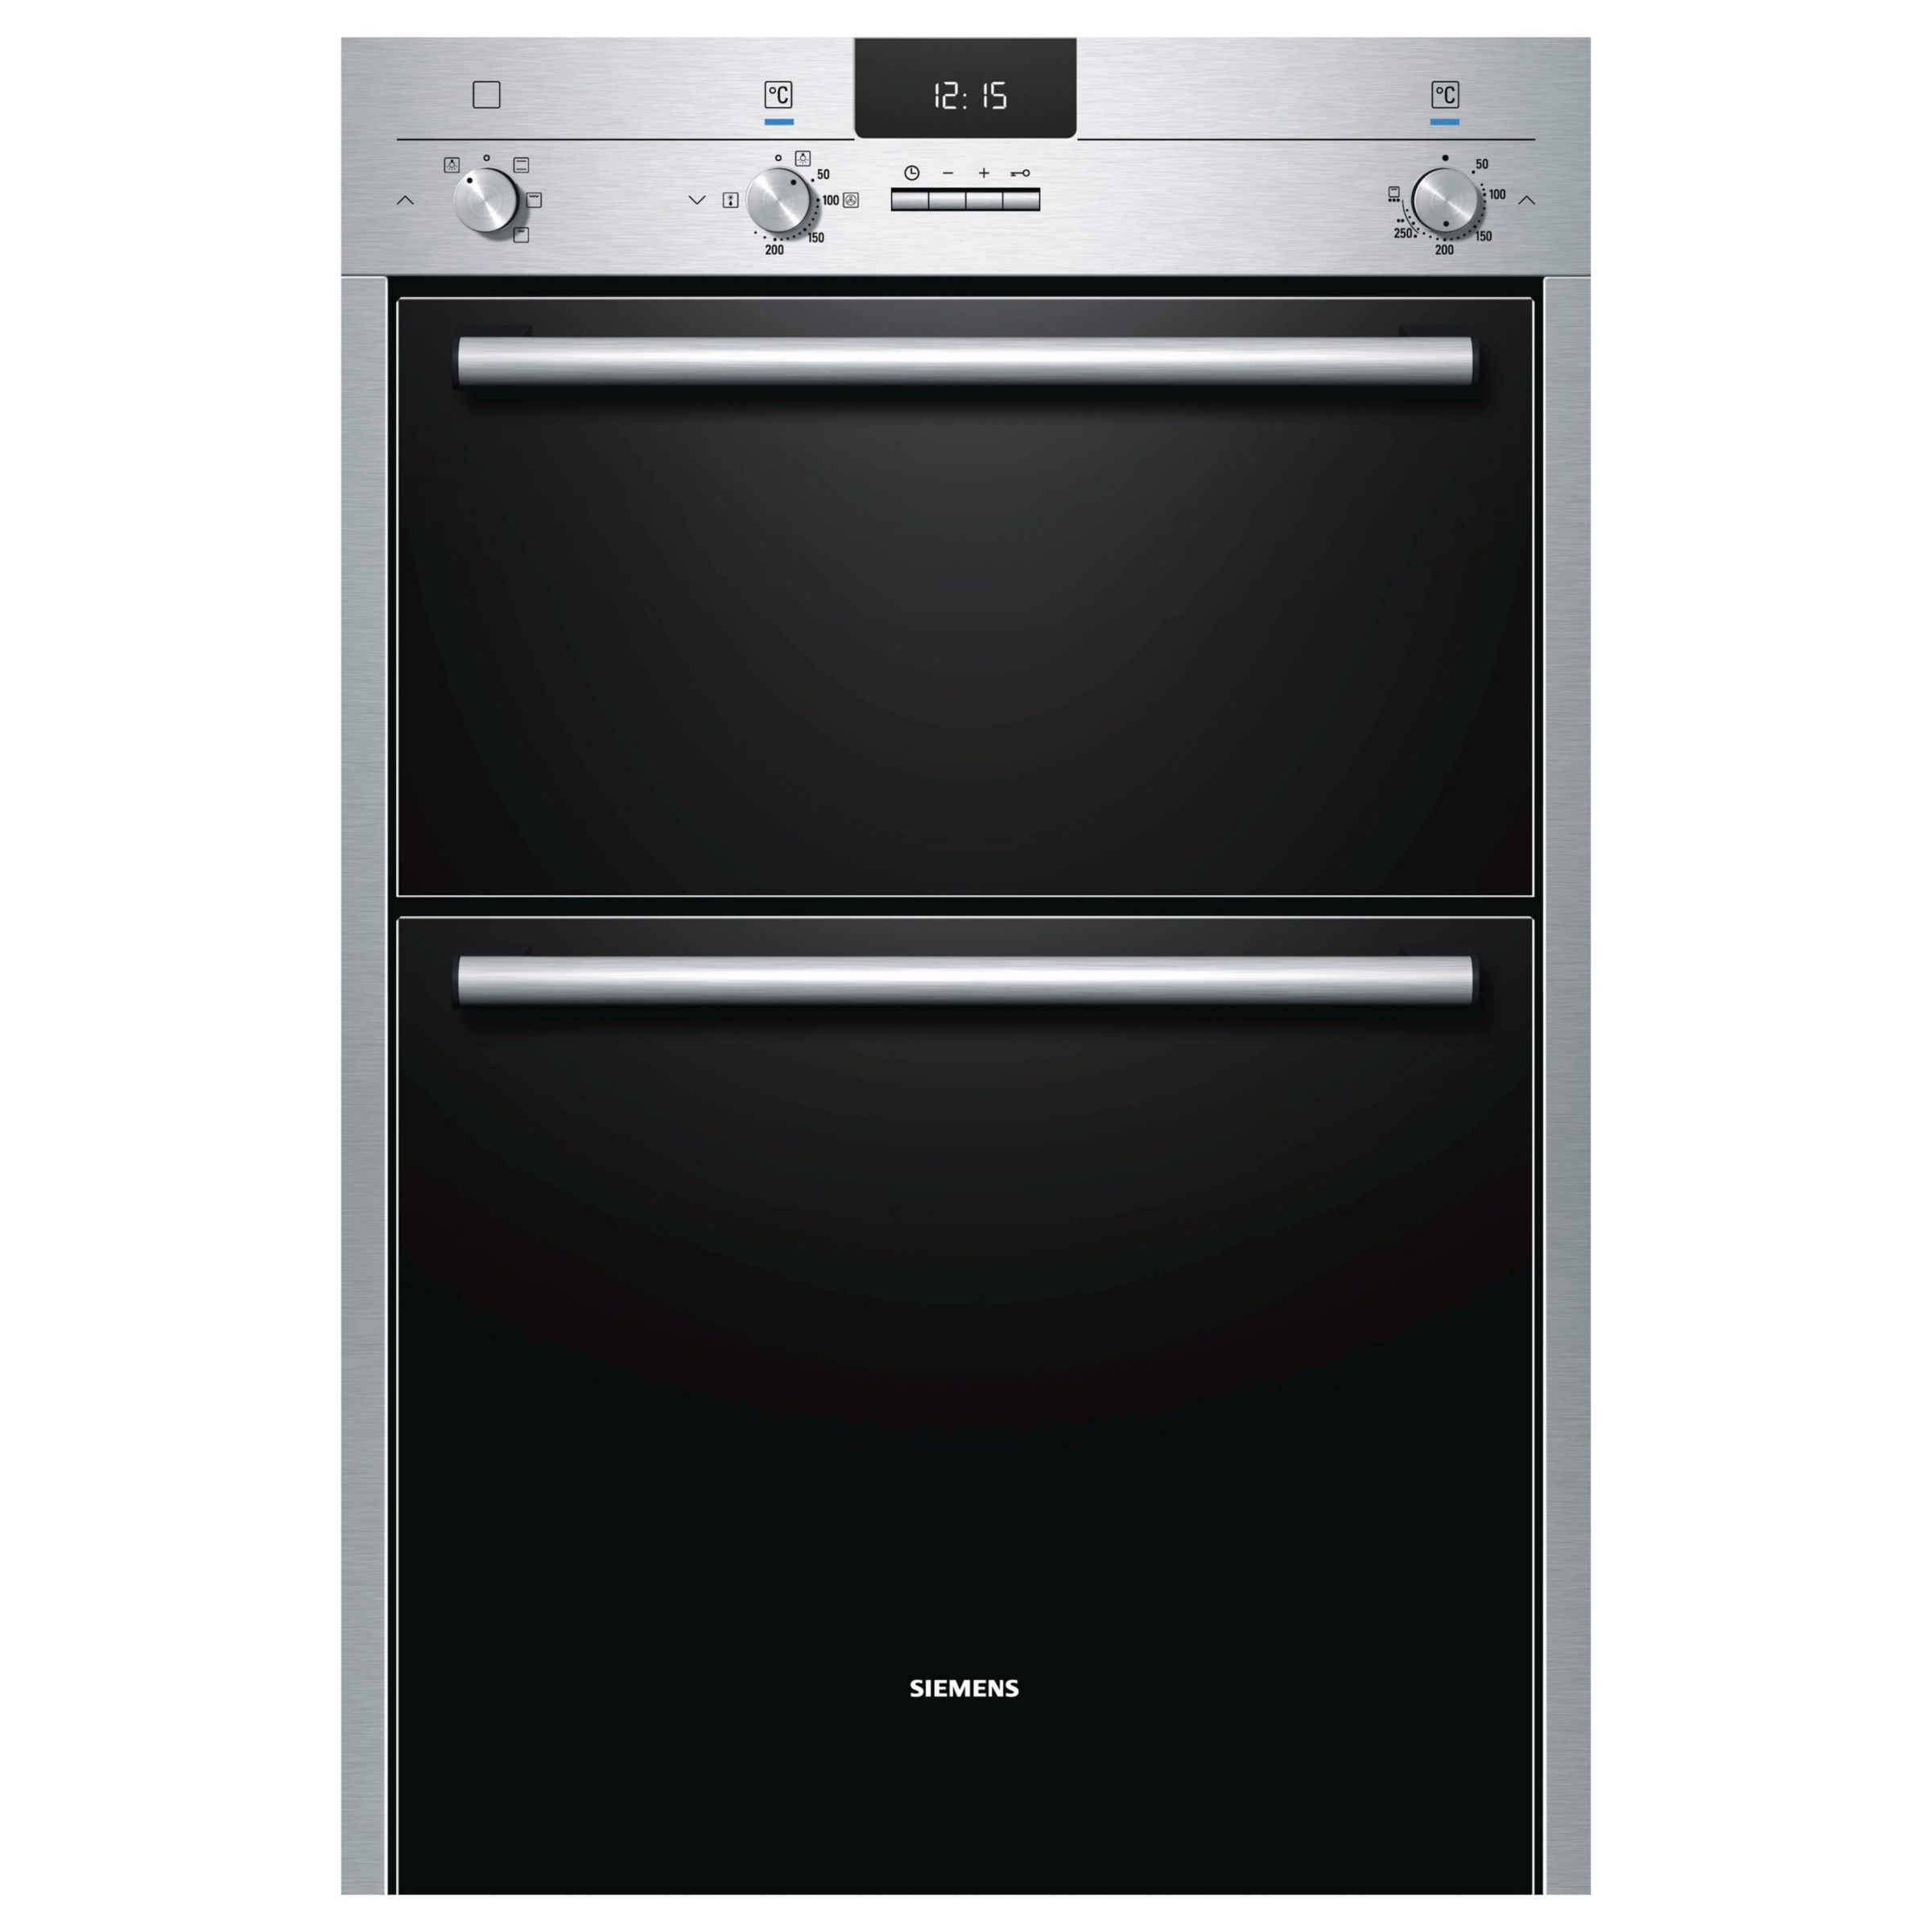 HB13MB521B Double Electric Oven,